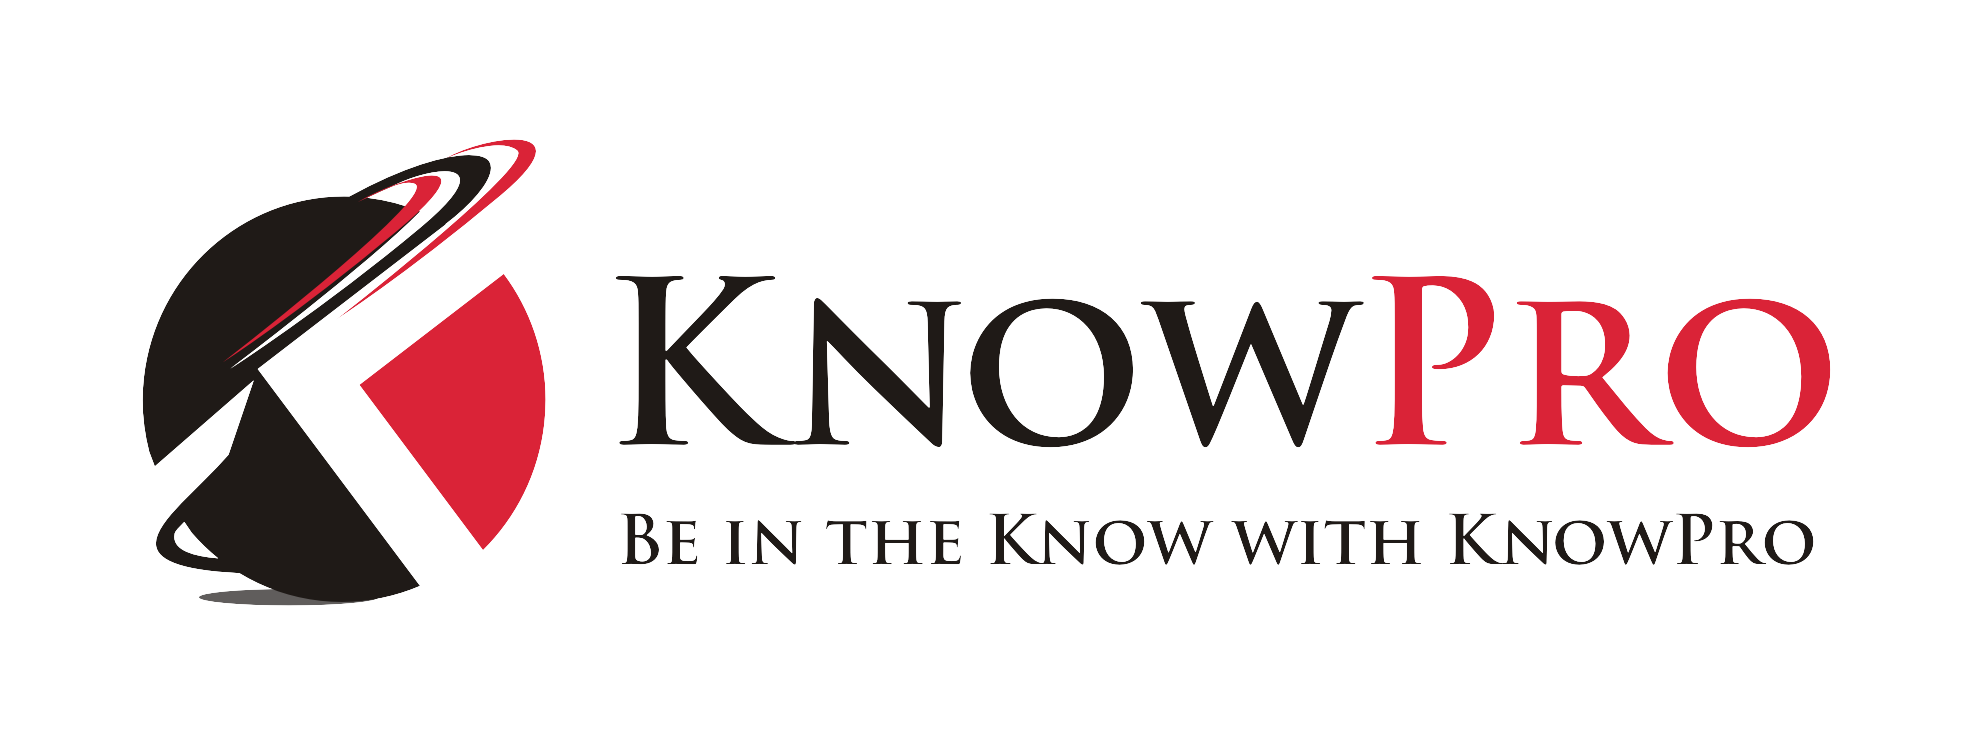 KnowPro